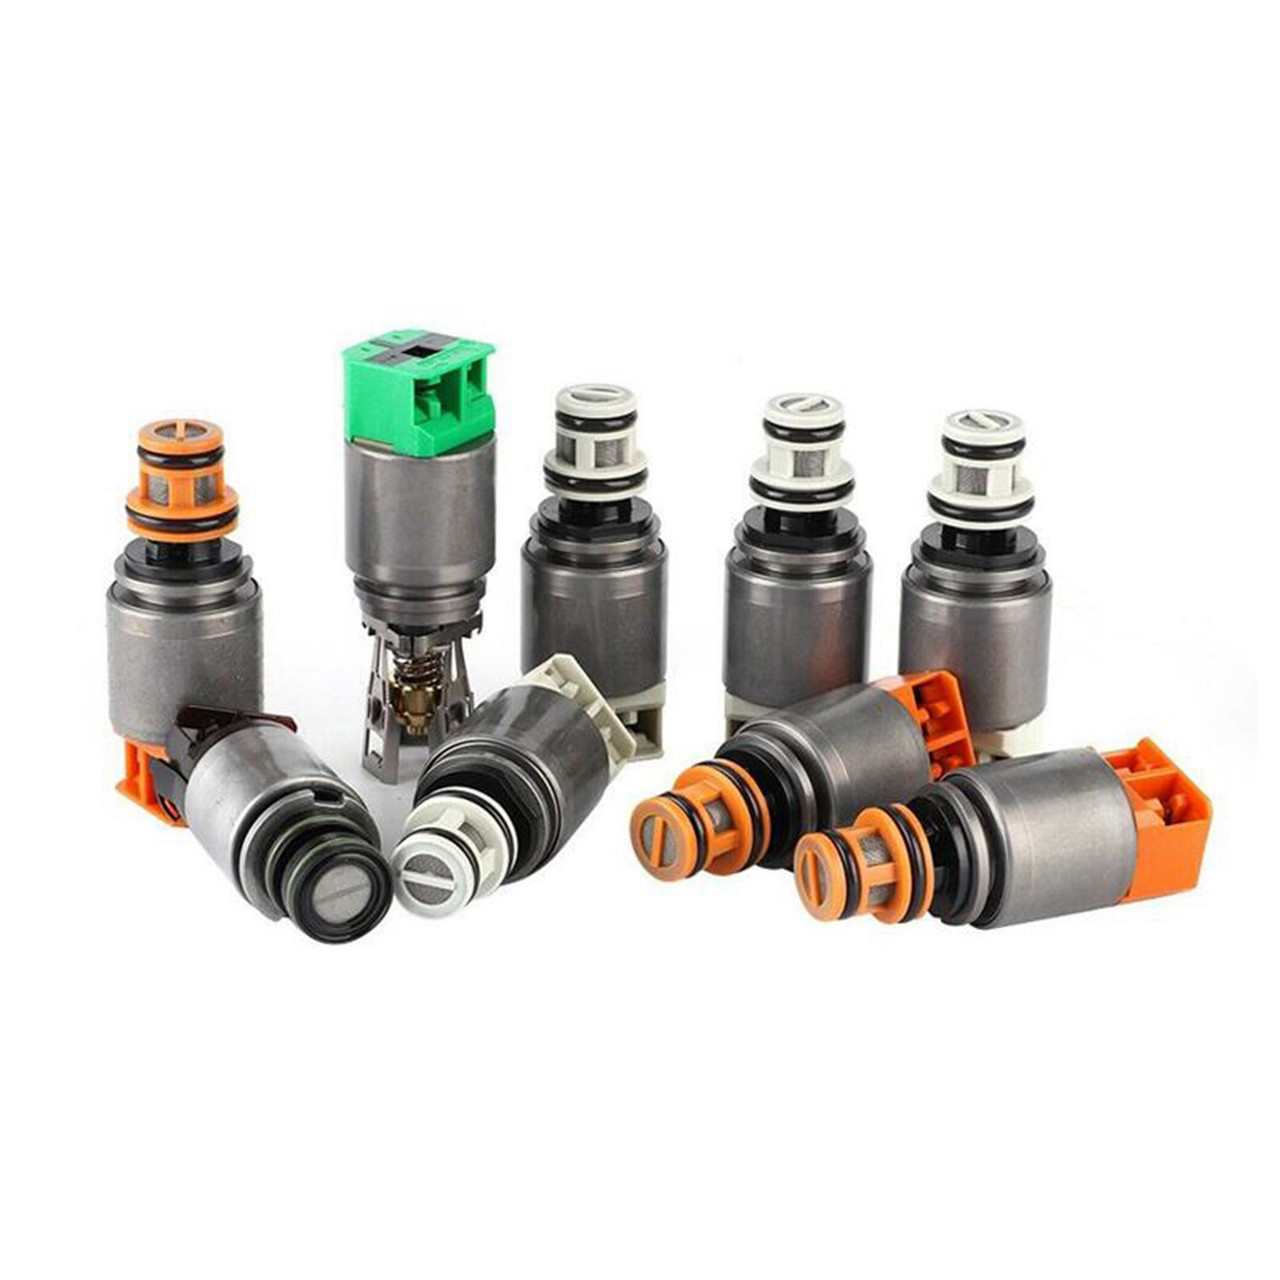 8HP45 8HP70, 8HP90 Solenoid Kit for BMW 8 Speed Mechatronics 1087 298 388